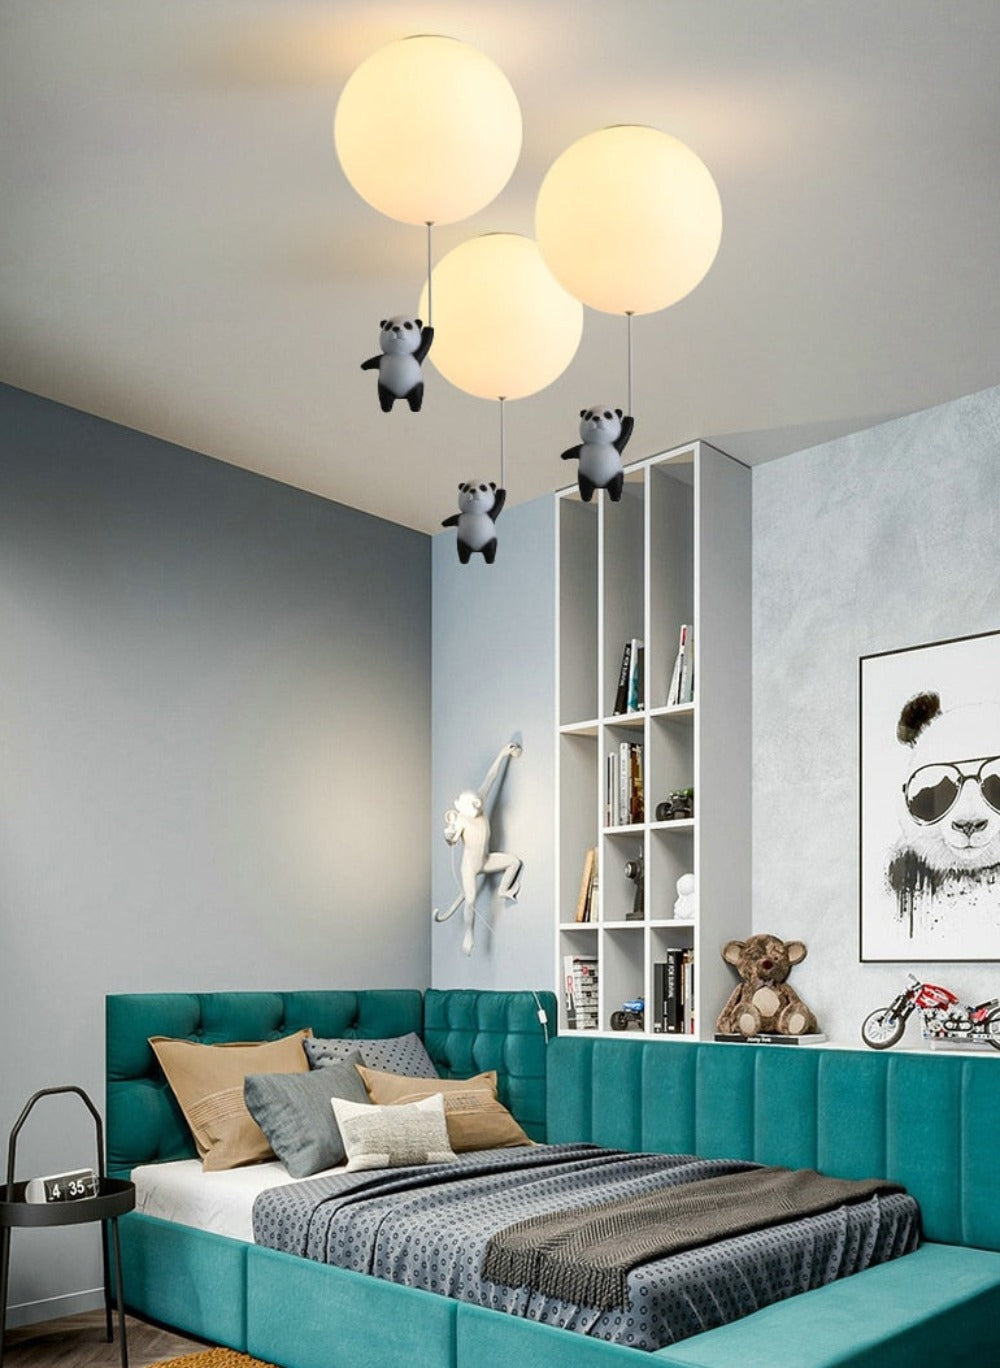 Panda Hanging from a balloon Ceiling light for children's bedroom